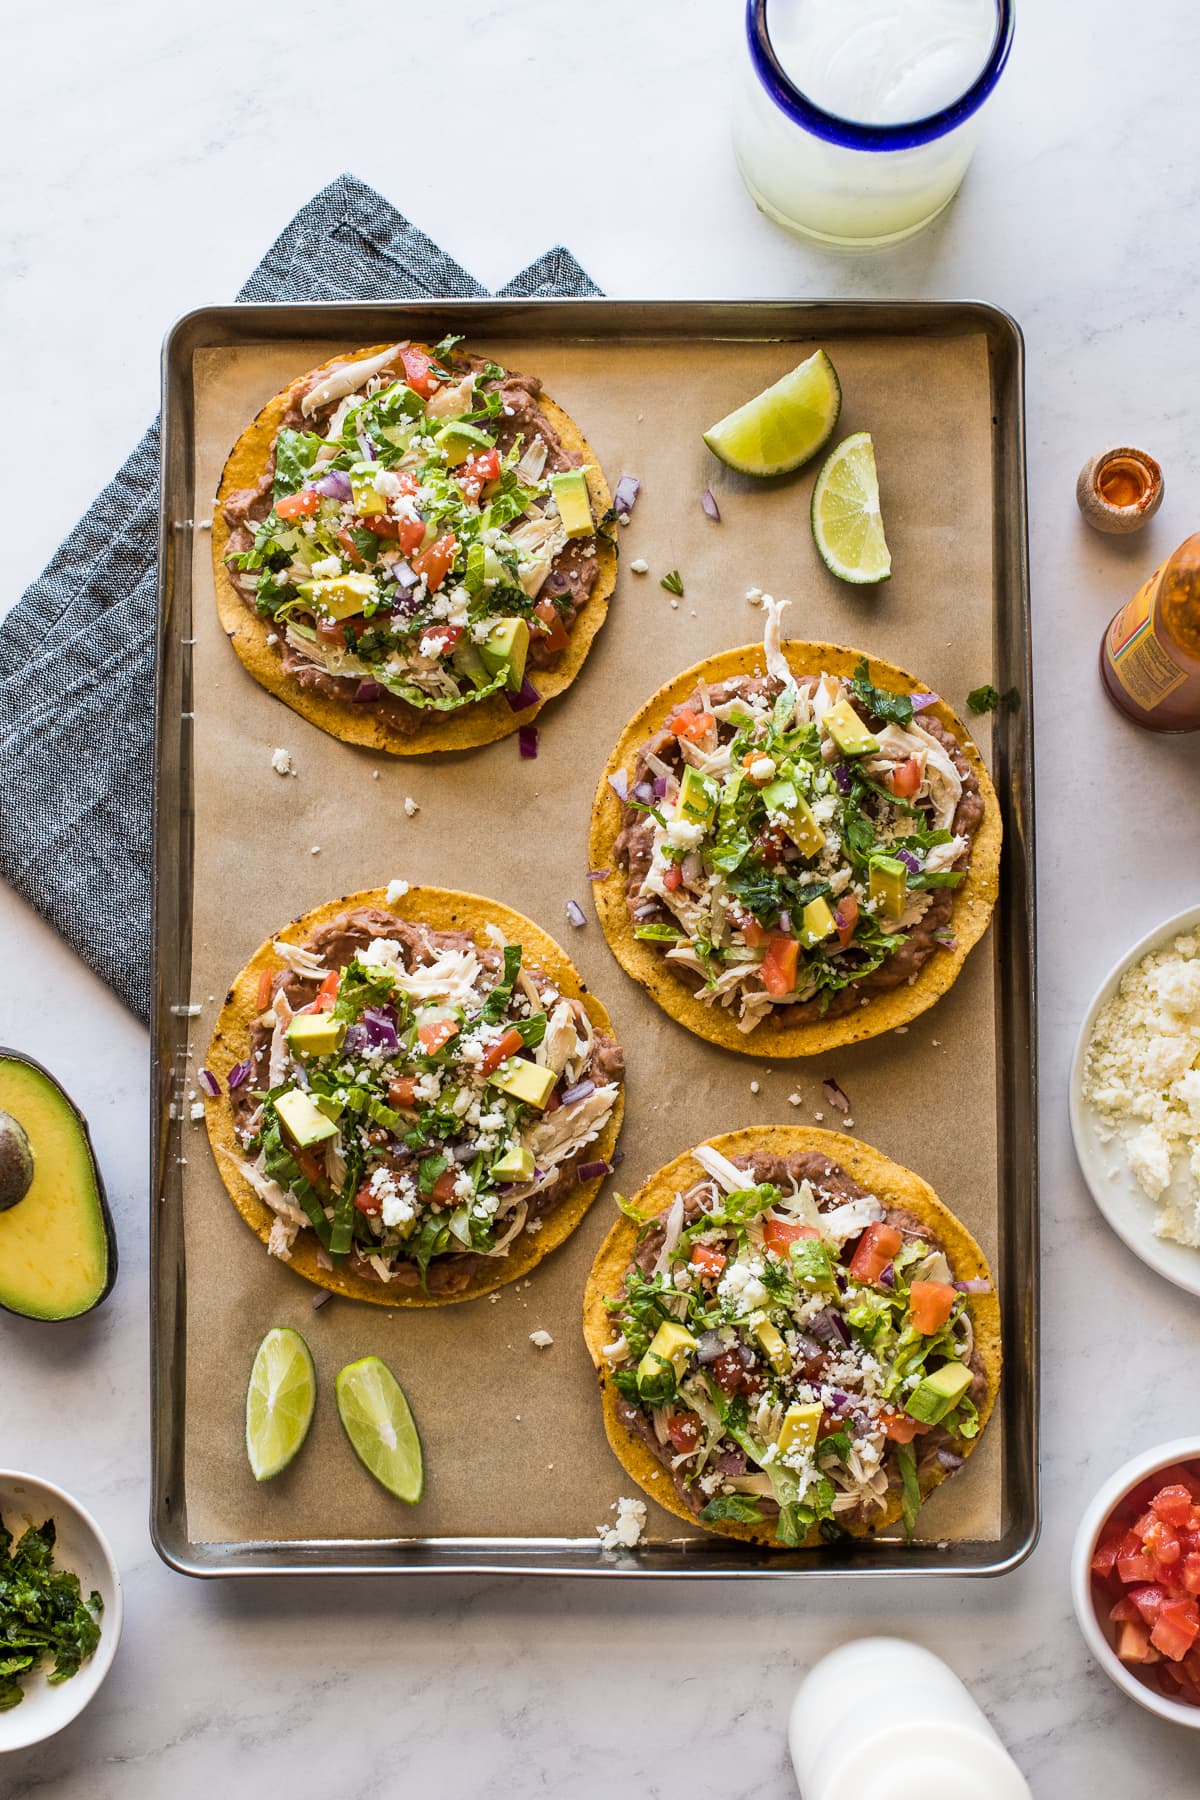 Chicken tostadas made with refried beans, shredded chicken, and lots of toppings.